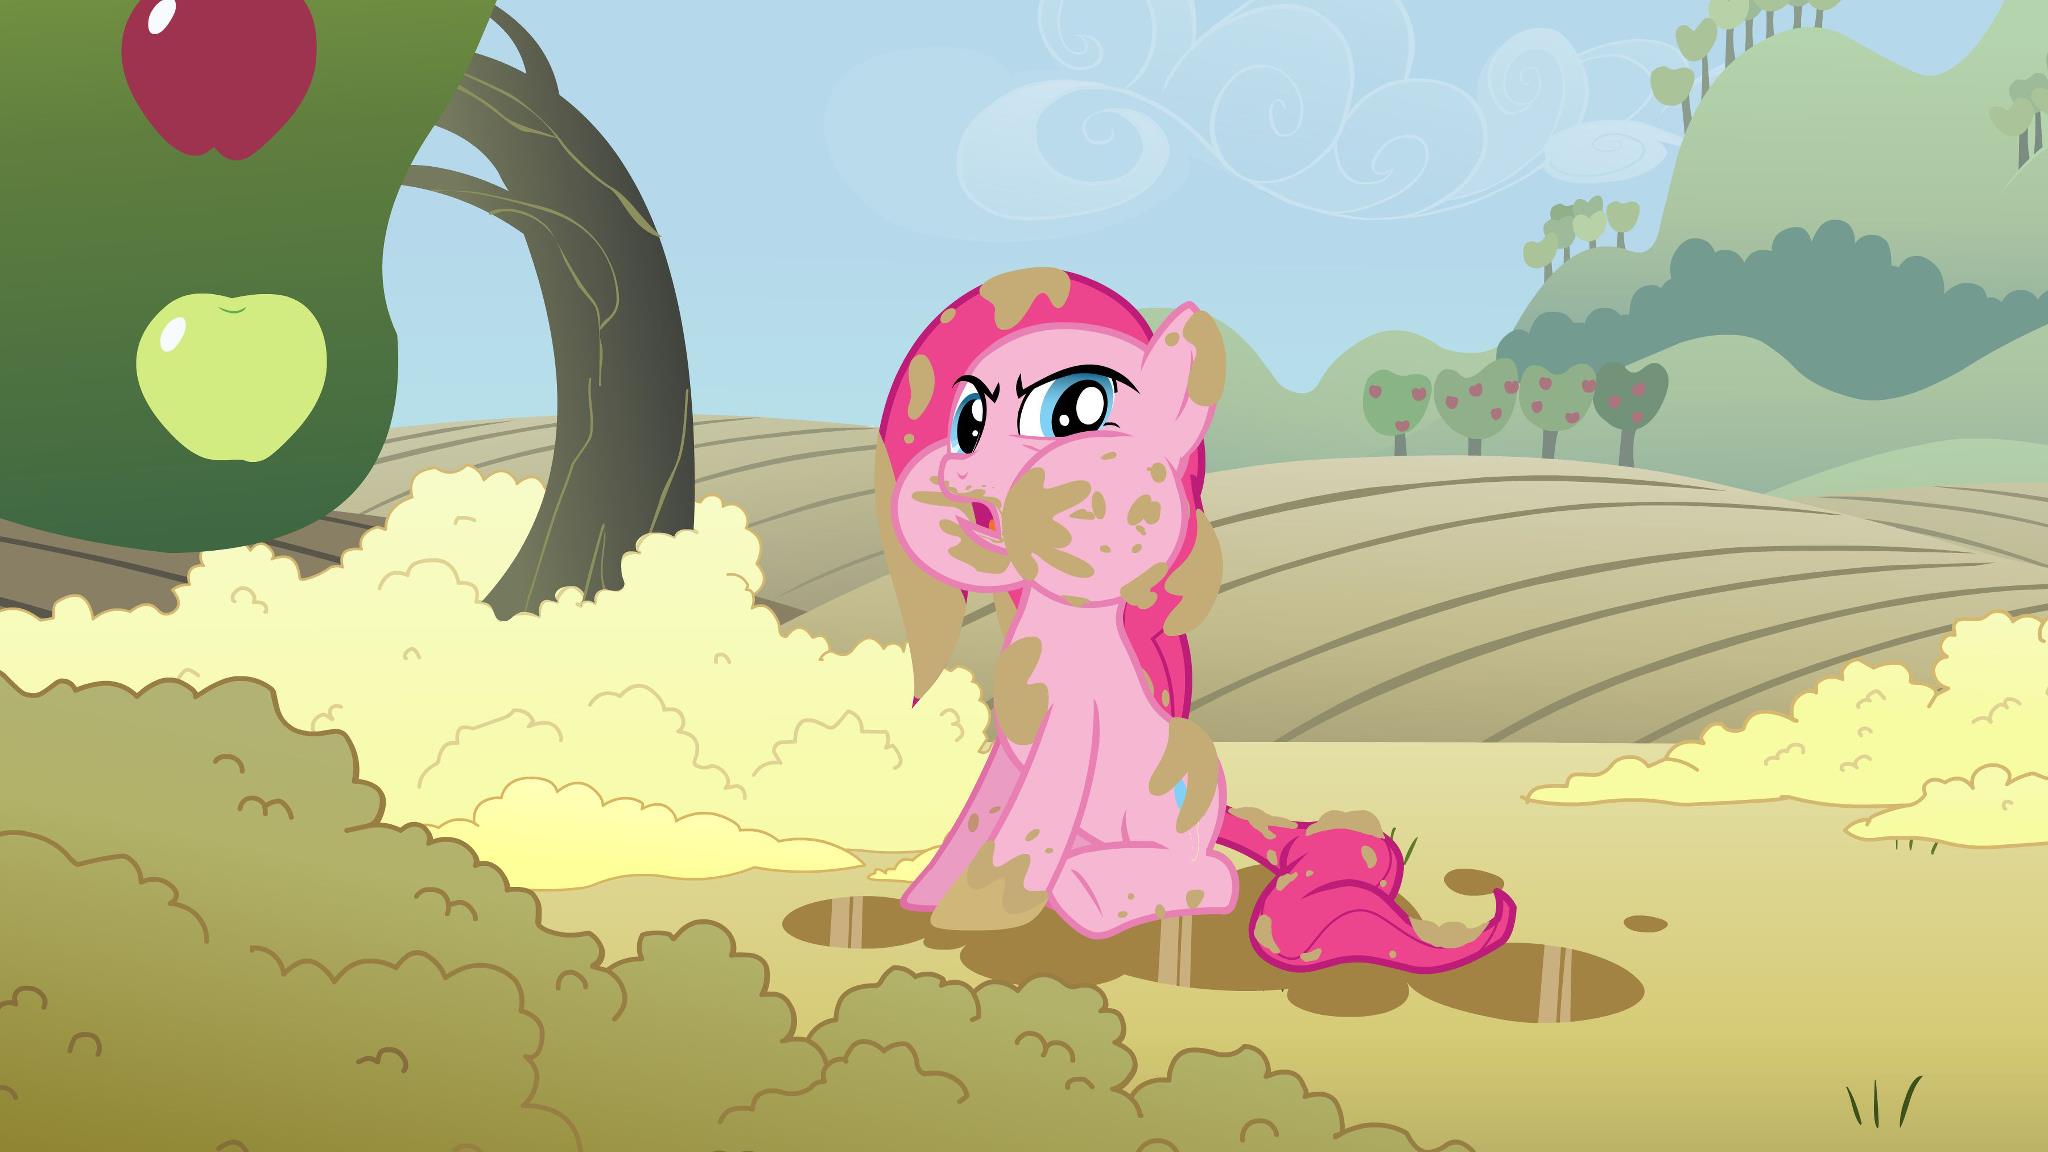 Pinkie Pie is in a puddle of chocolate milk.